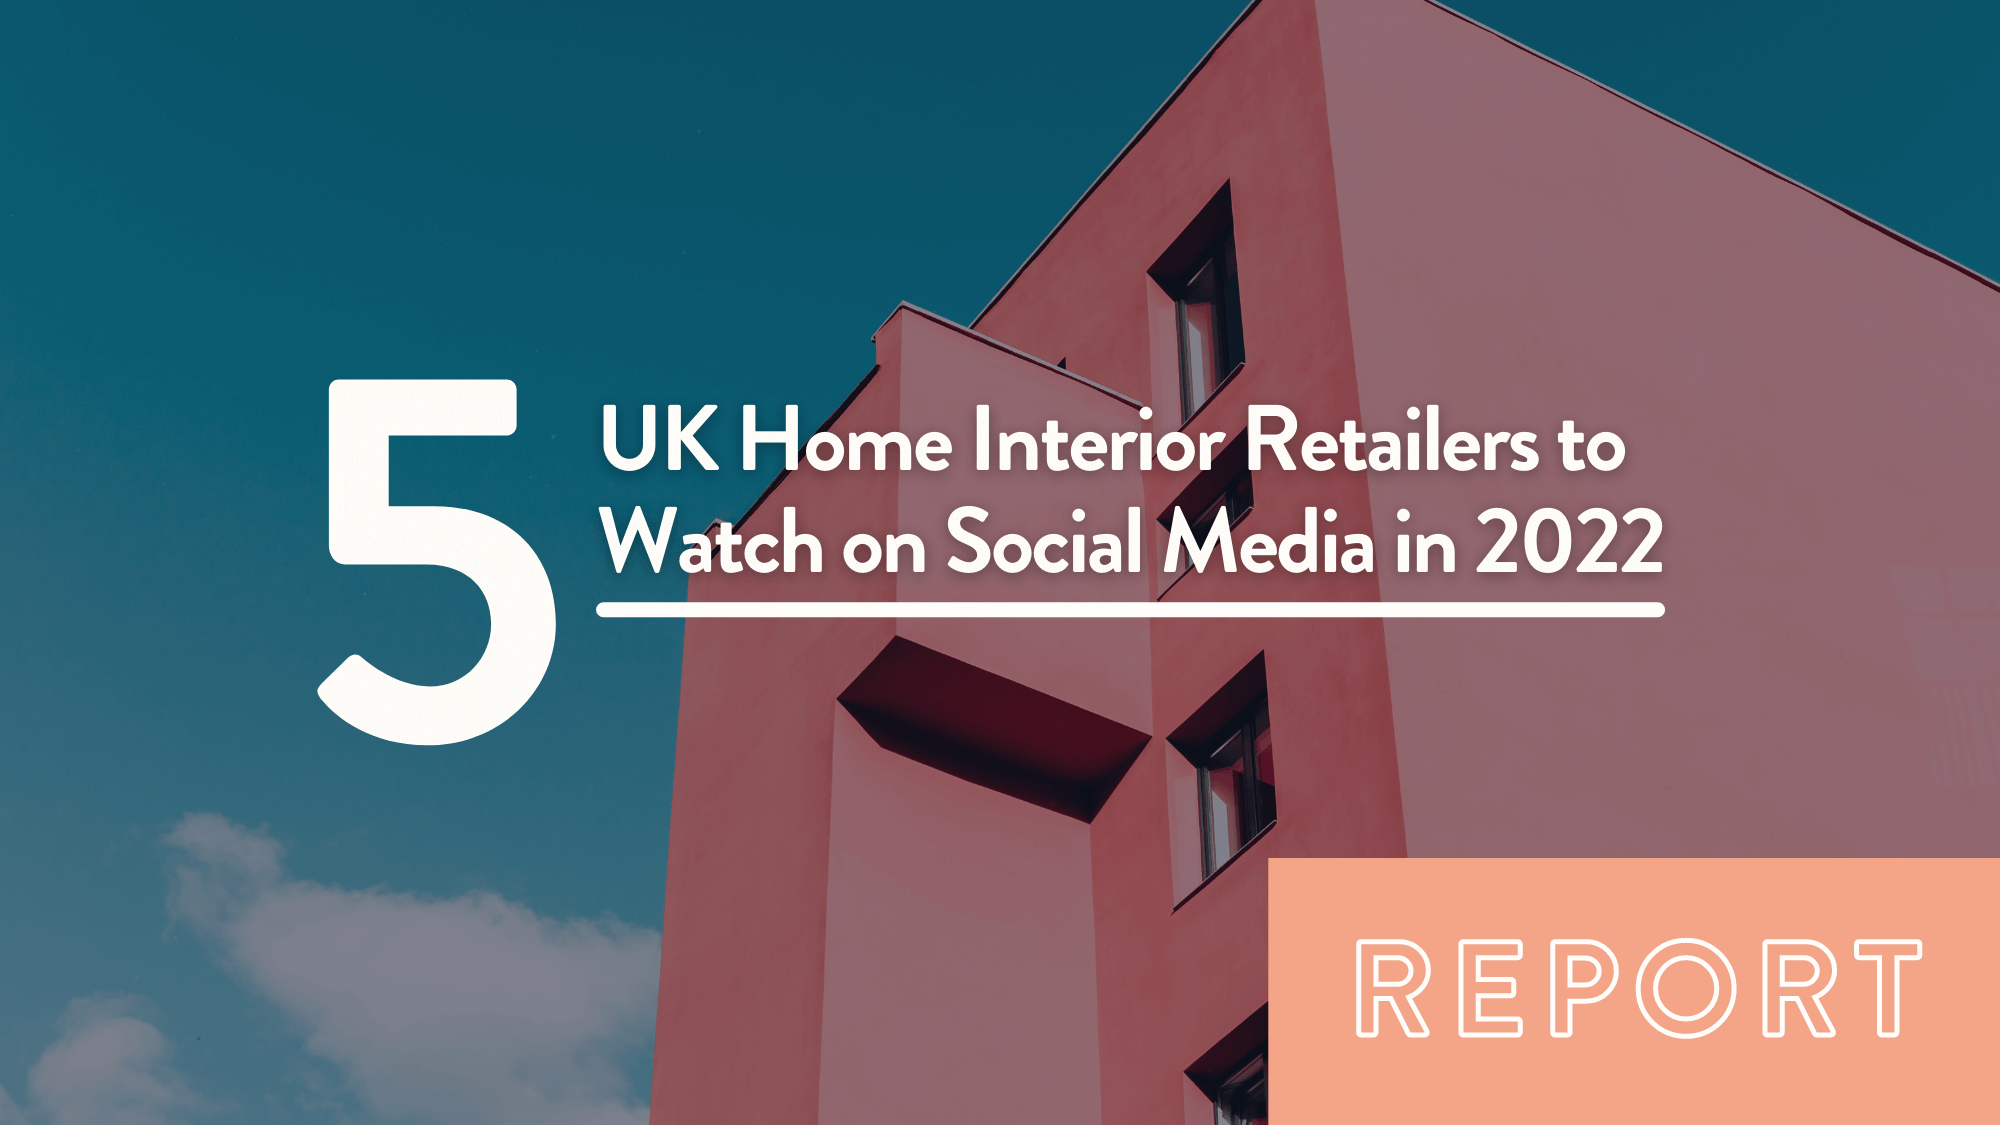 Report UK Home Interior Retailers to Watch on Social Media